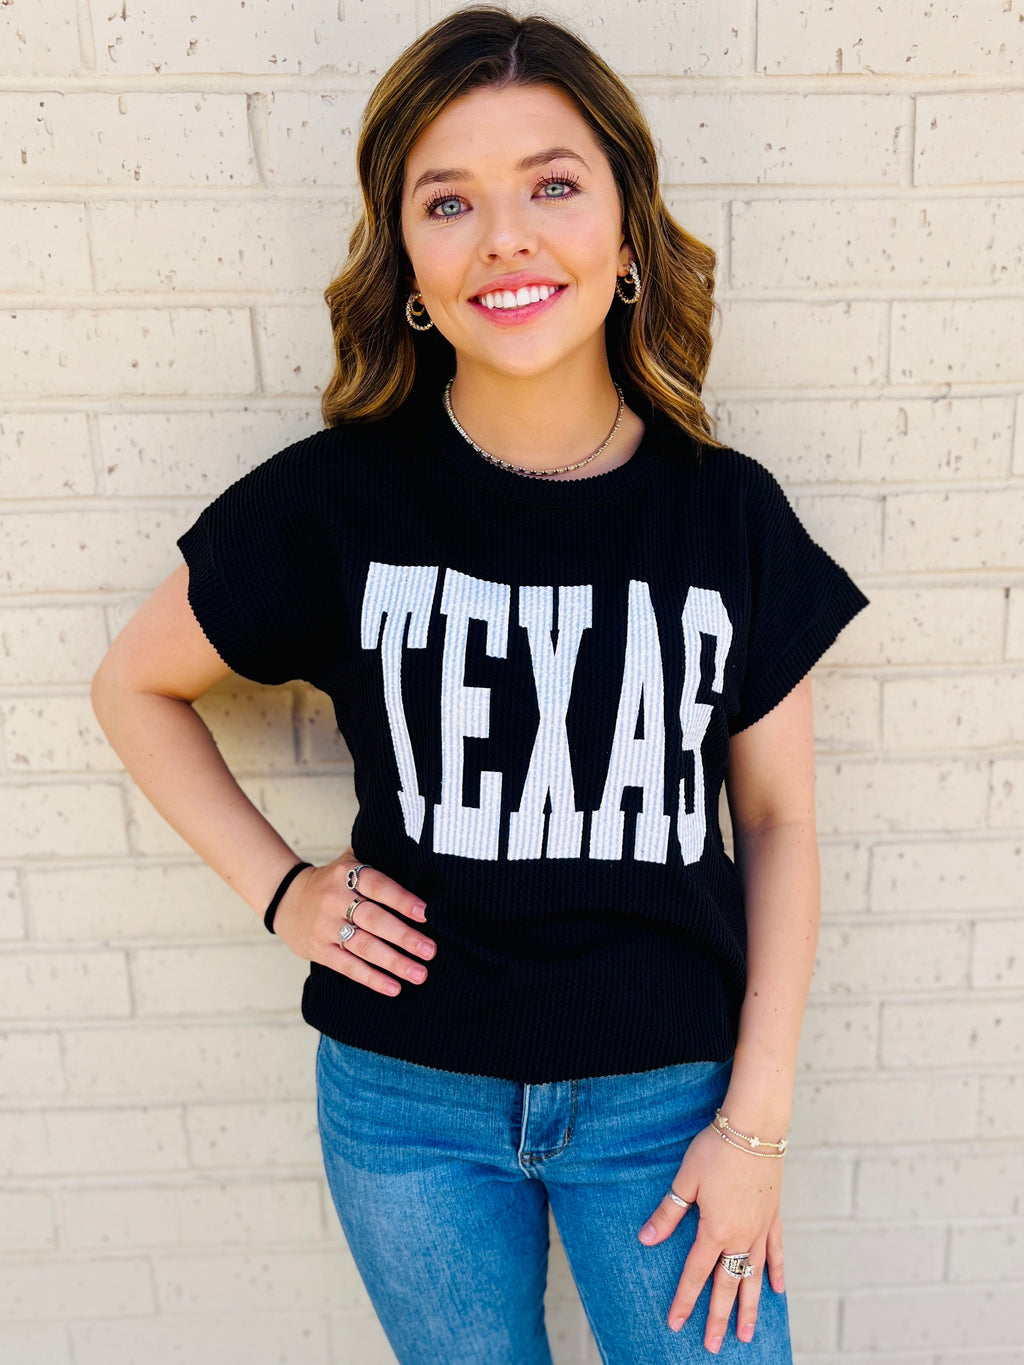 TEXAS Black Graphic Ribbed Top | gussieduponline